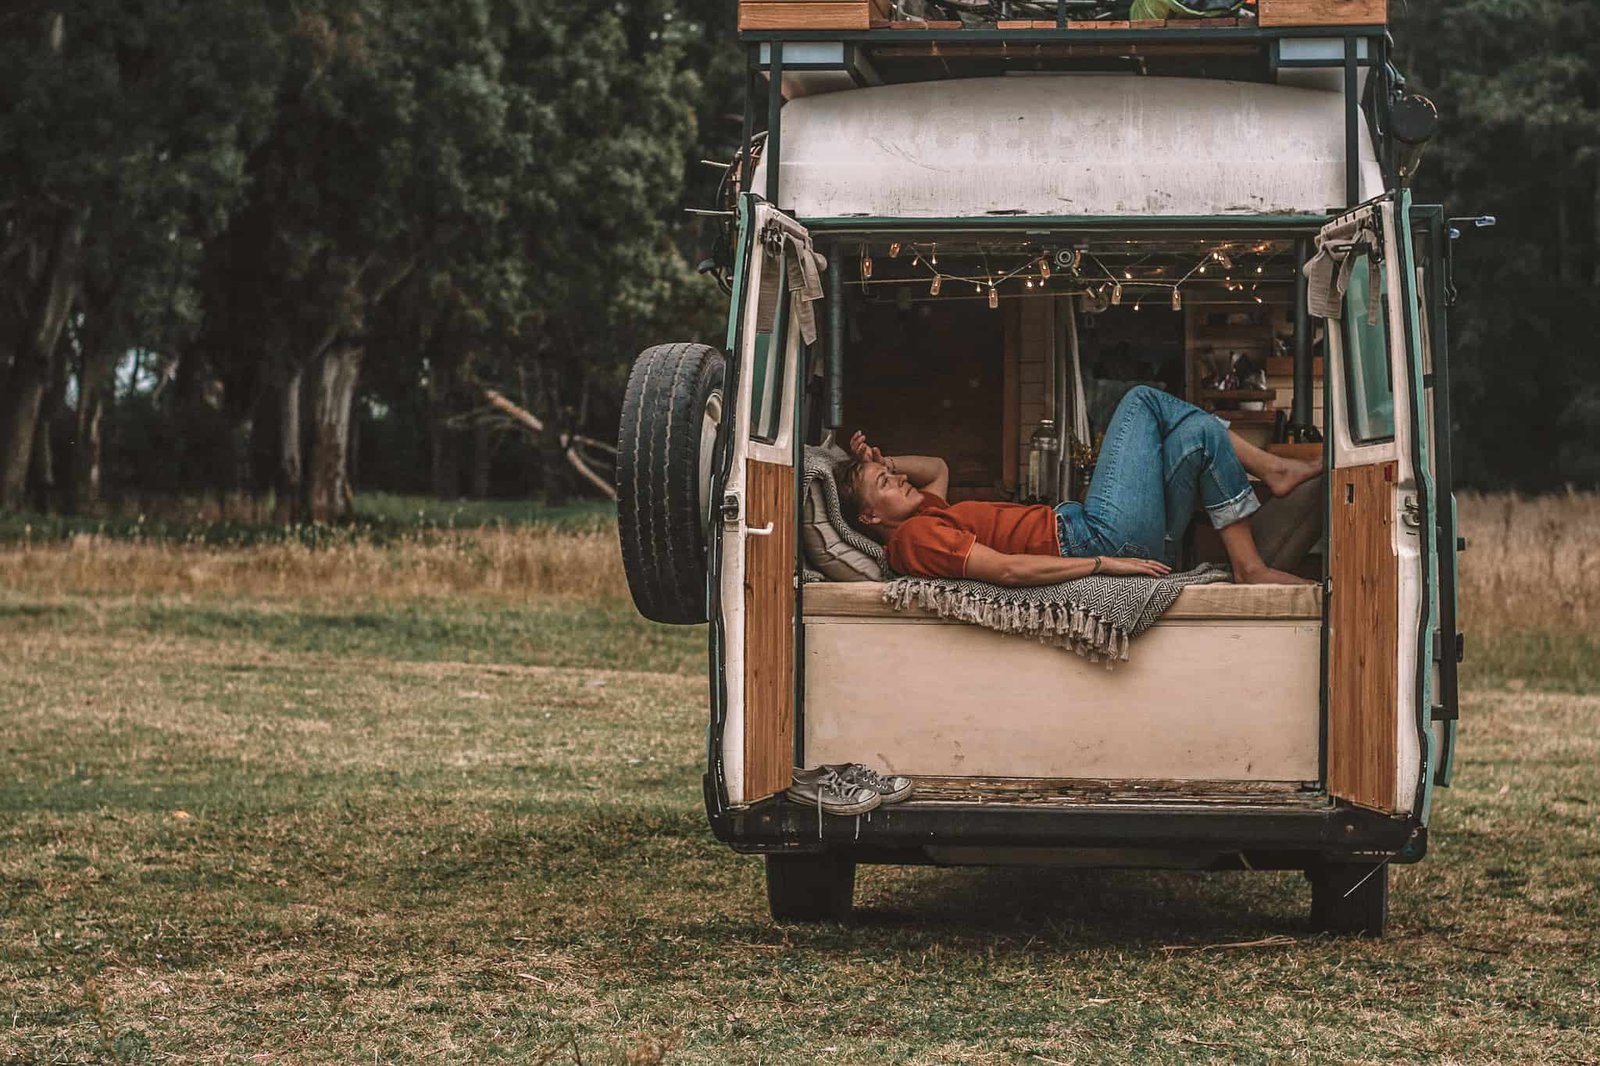 5 Must-Have Campervan Accessories for Life on the Road